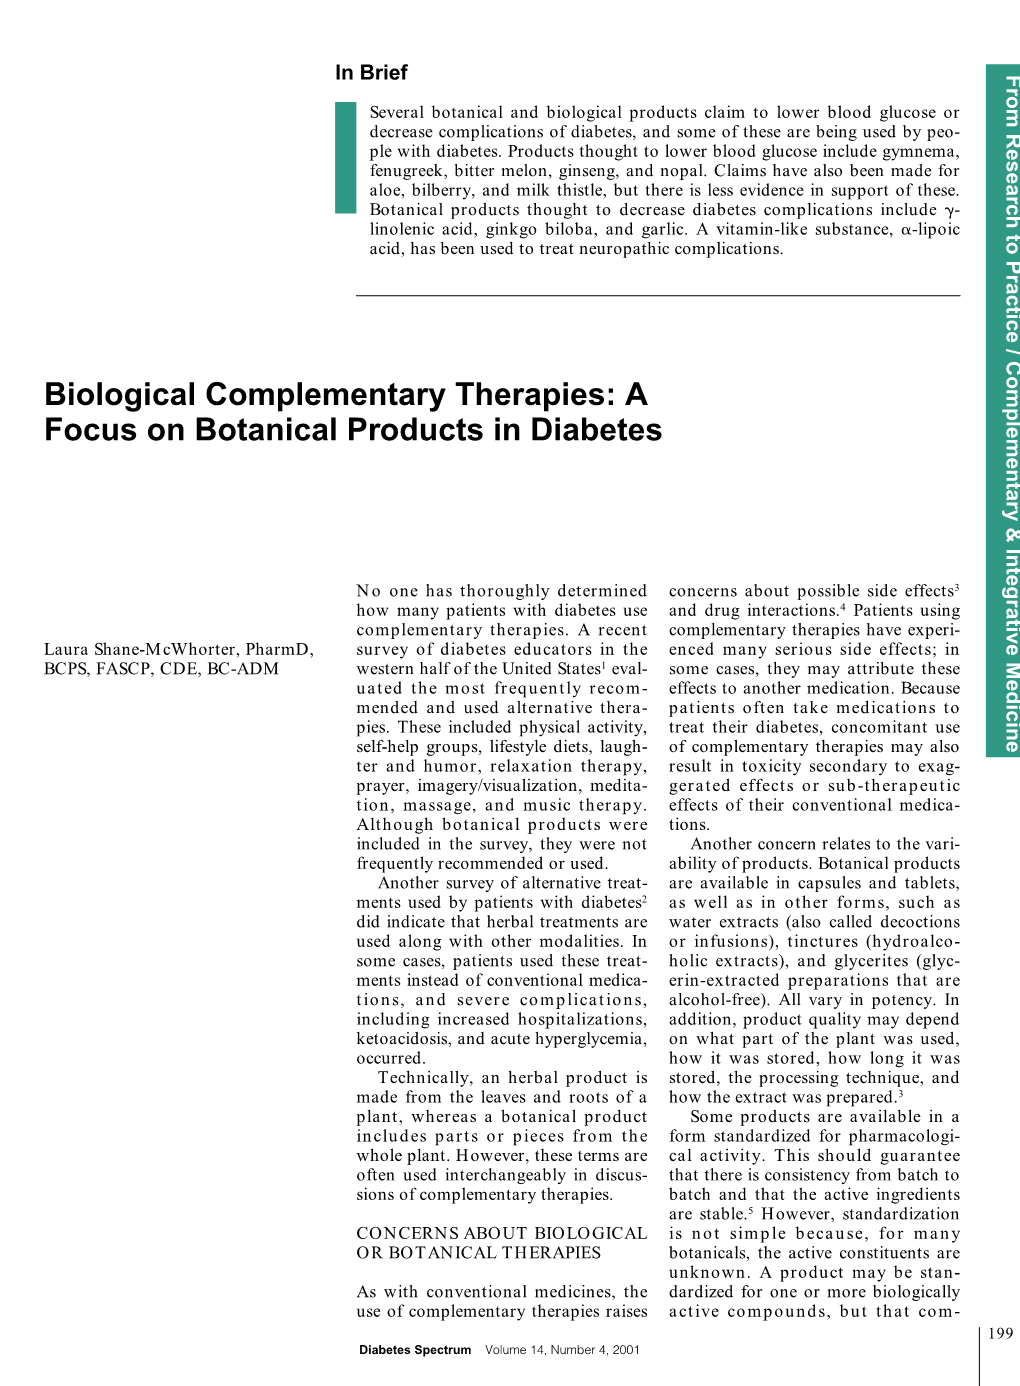 Biological Complementary Therapies: a Focus on Botanical Products in Diabetes